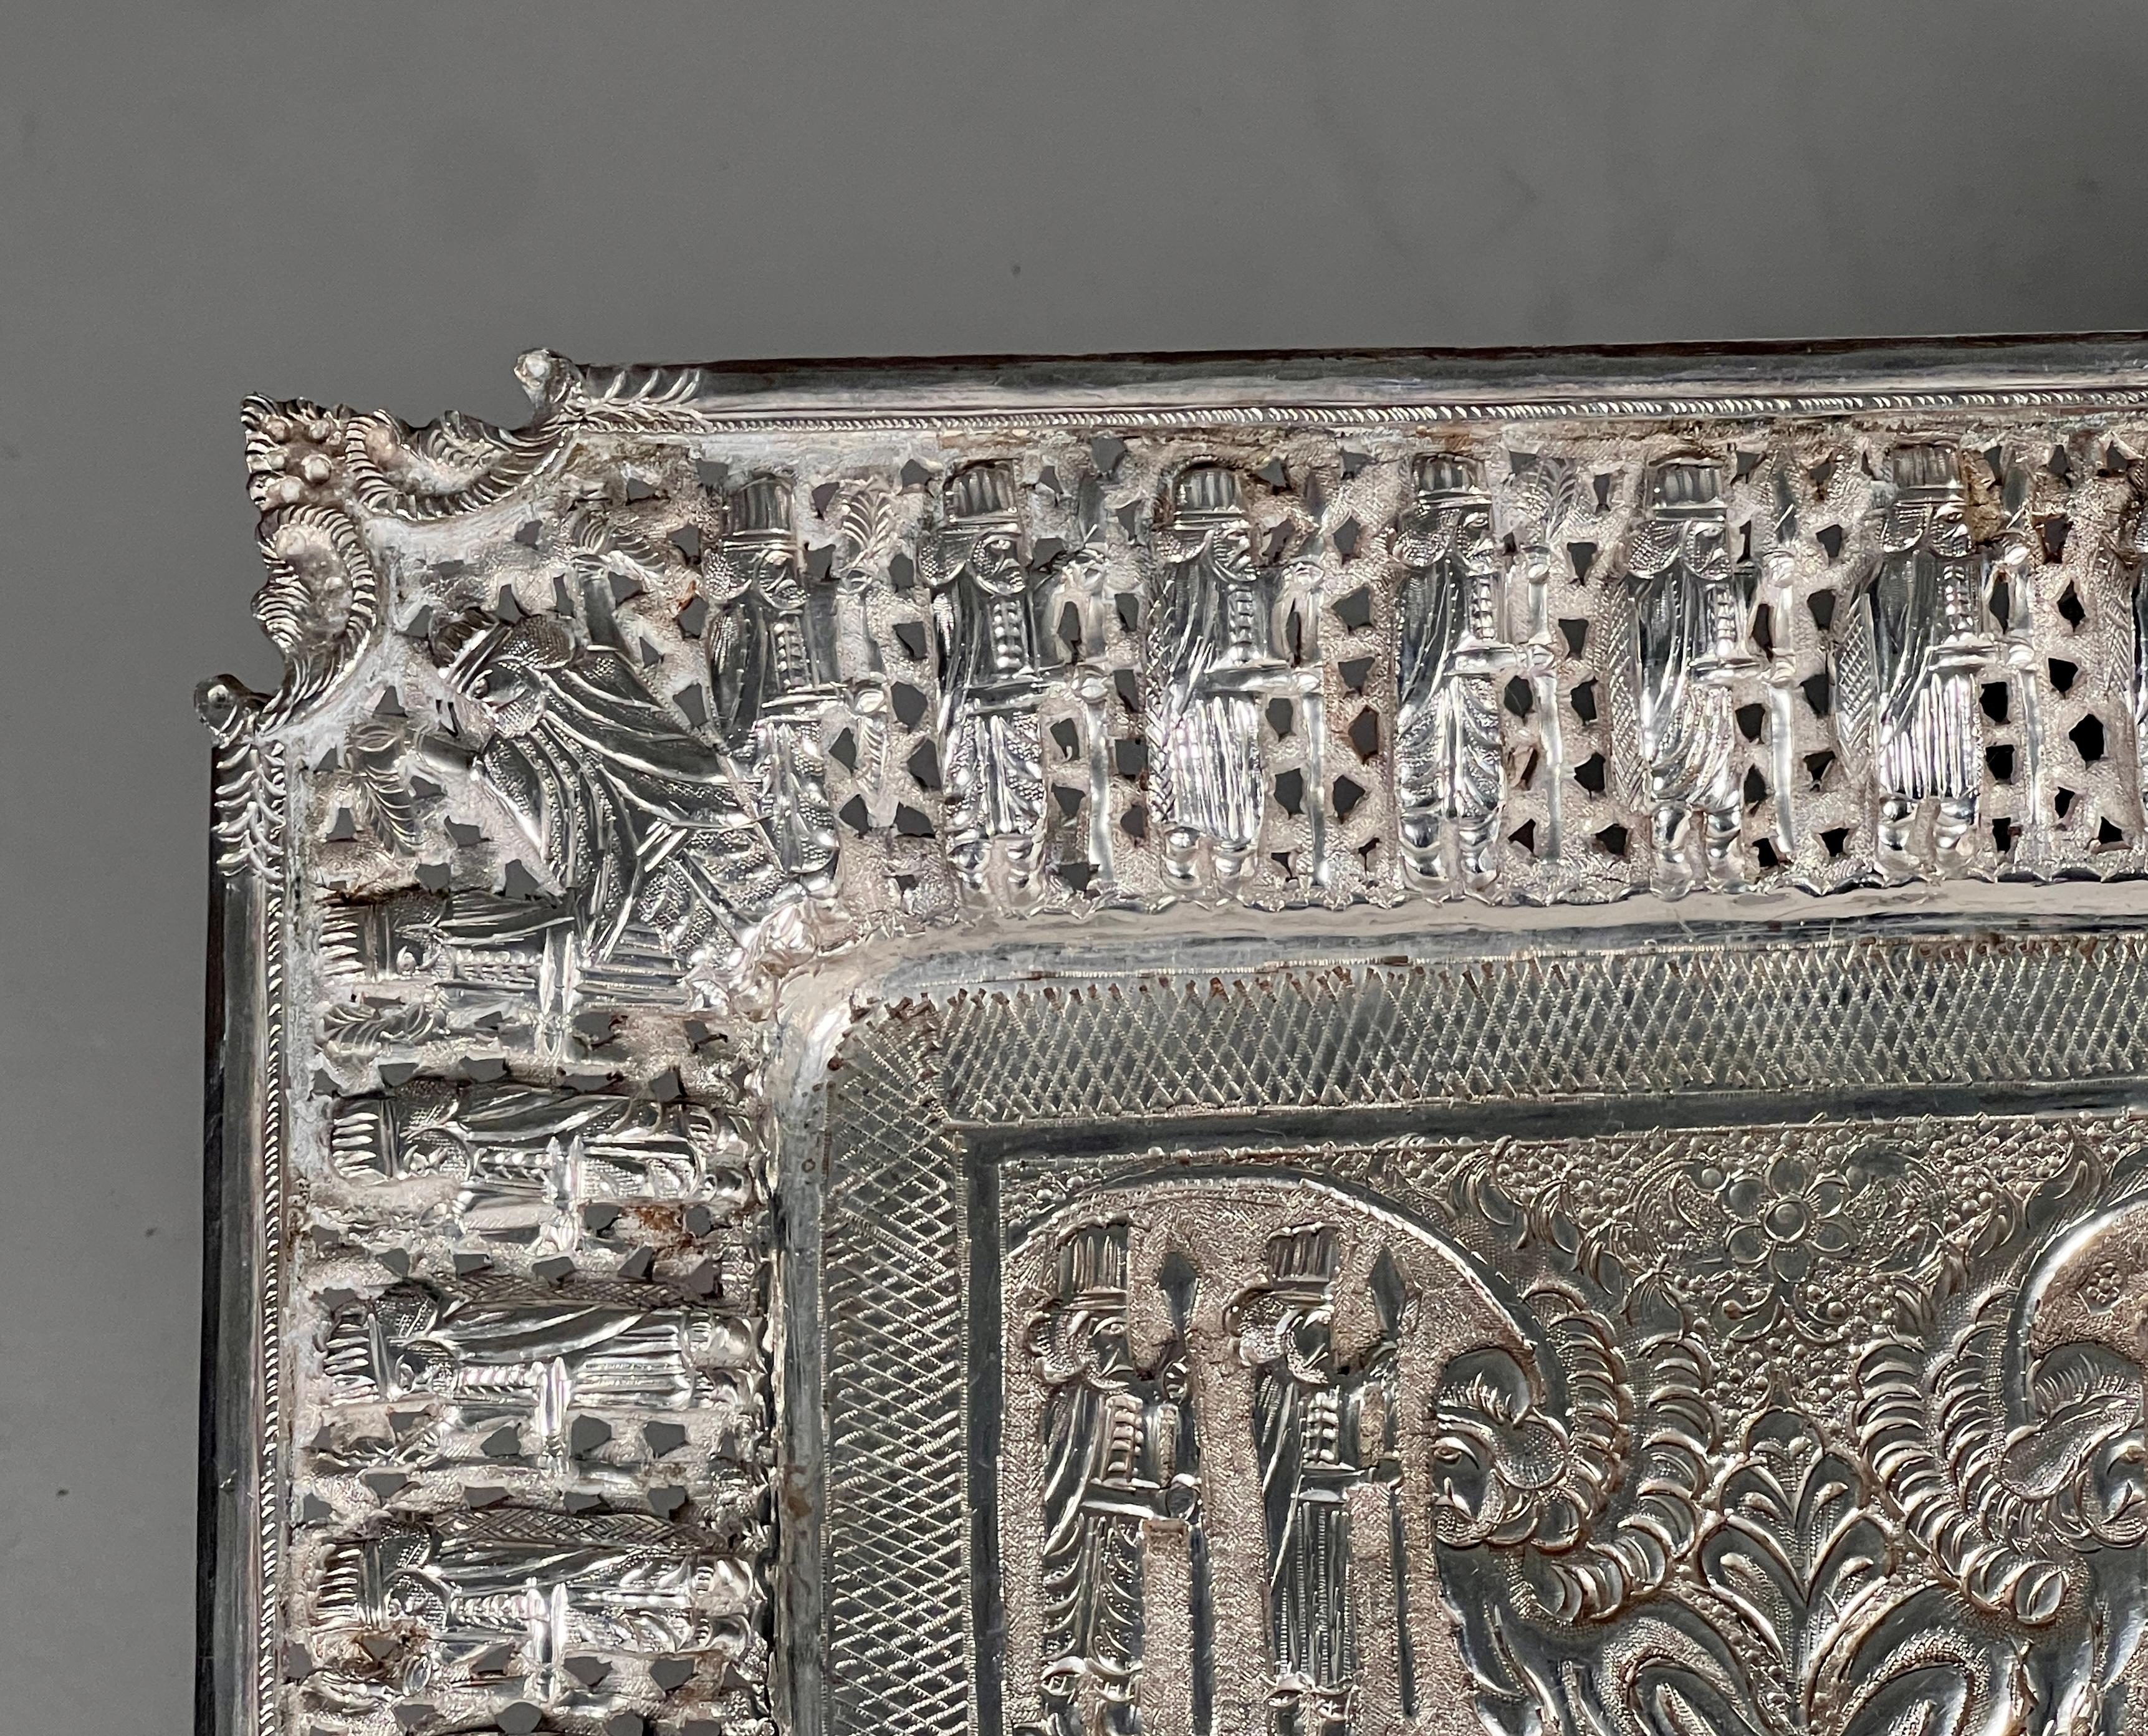 A mid 20th century Persian Isfahan solid silver / wall plaque or tray of rectangular form. This is a stunning piece of artwork. The tray also features the artist's name, which adds a personal touch and showcases their craftsmanship.

One of the most